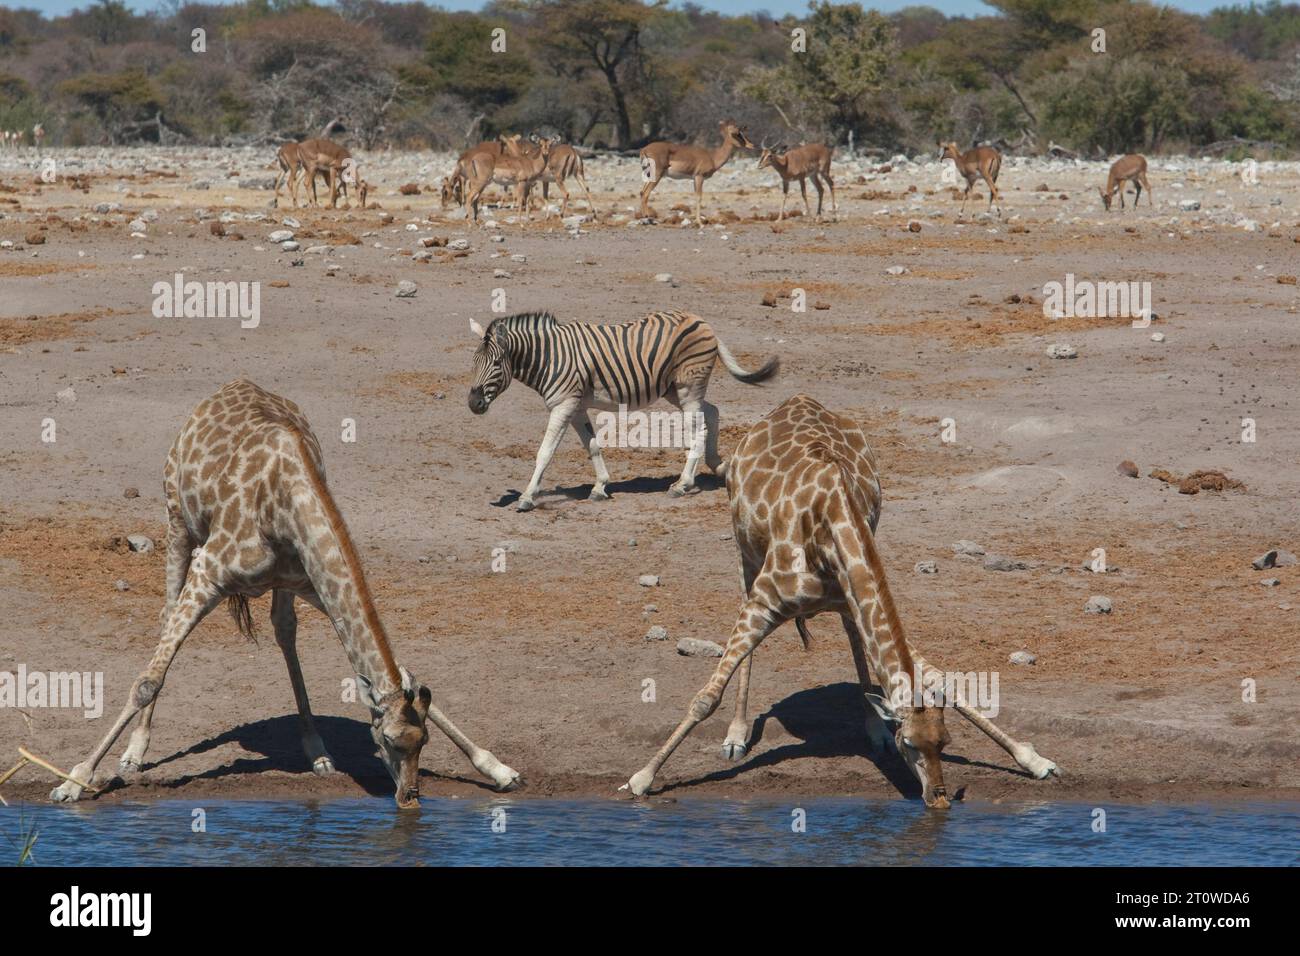 NAMIBIA, AFRICA MERIDIONALE Foto Stock